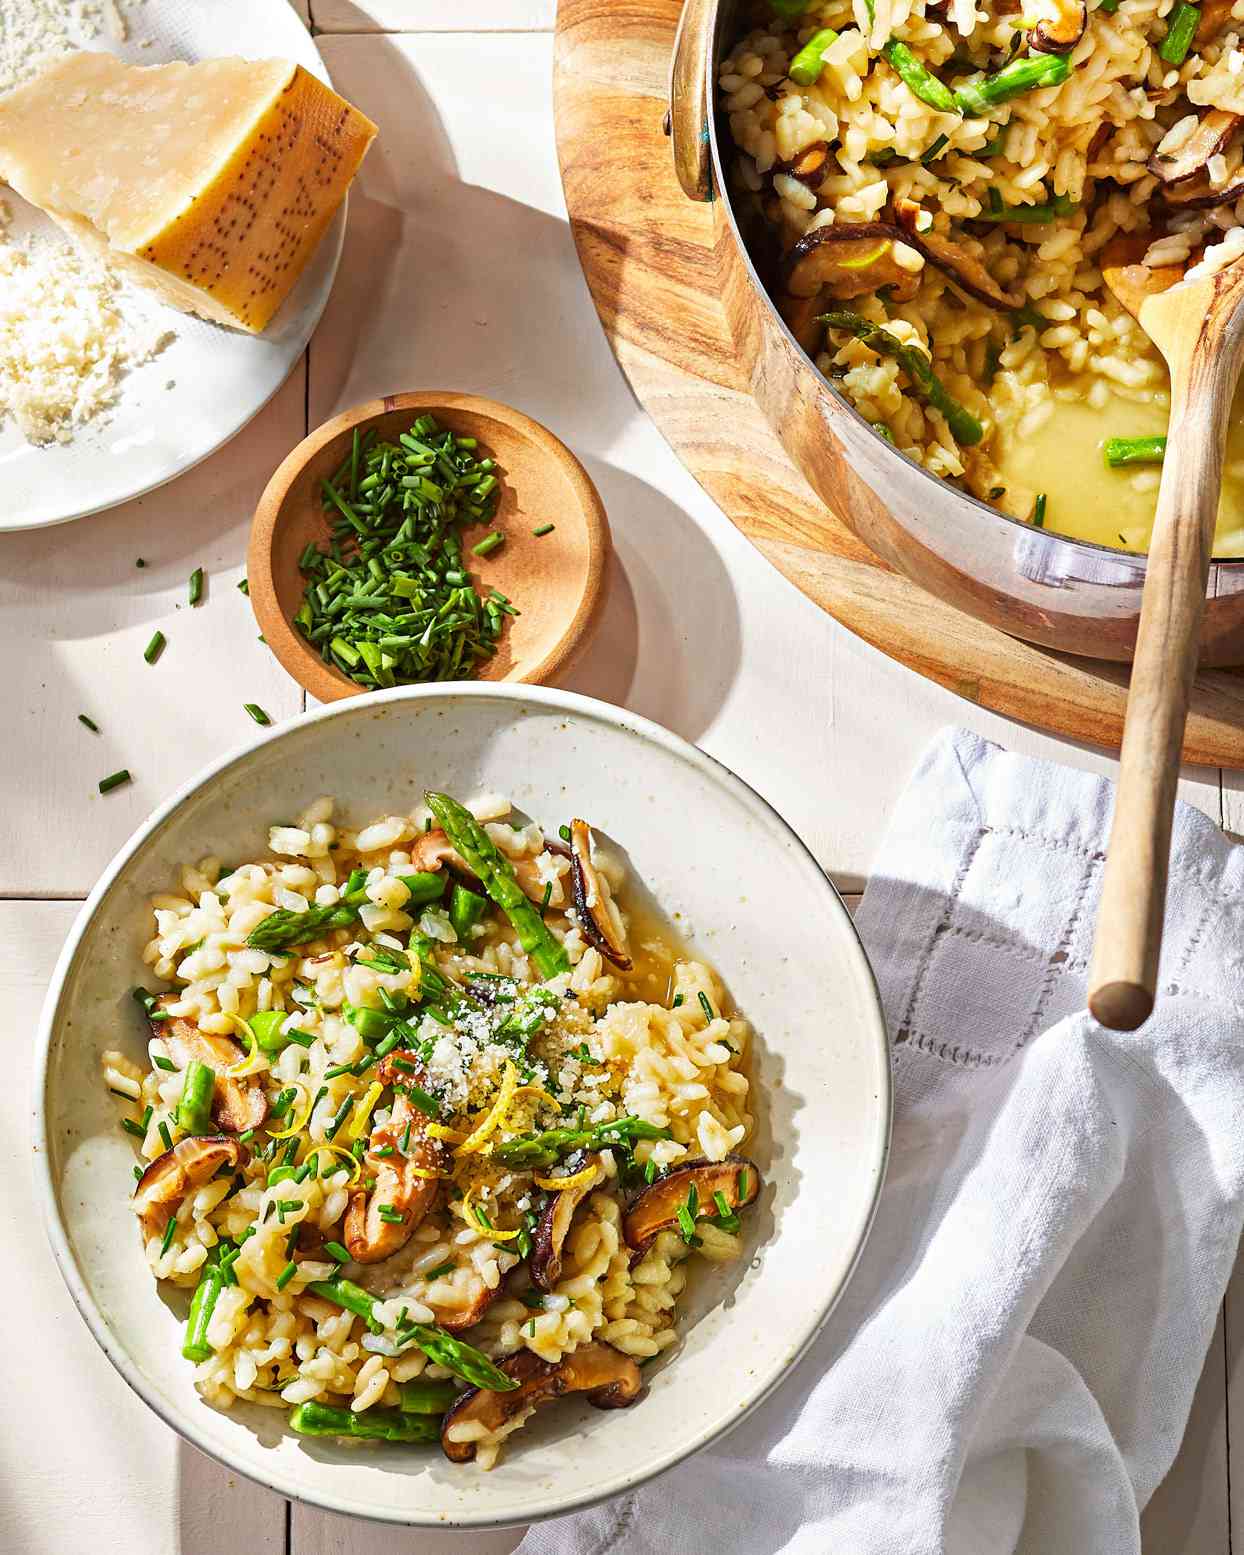 Risotto with Asparagus and Shiitakes